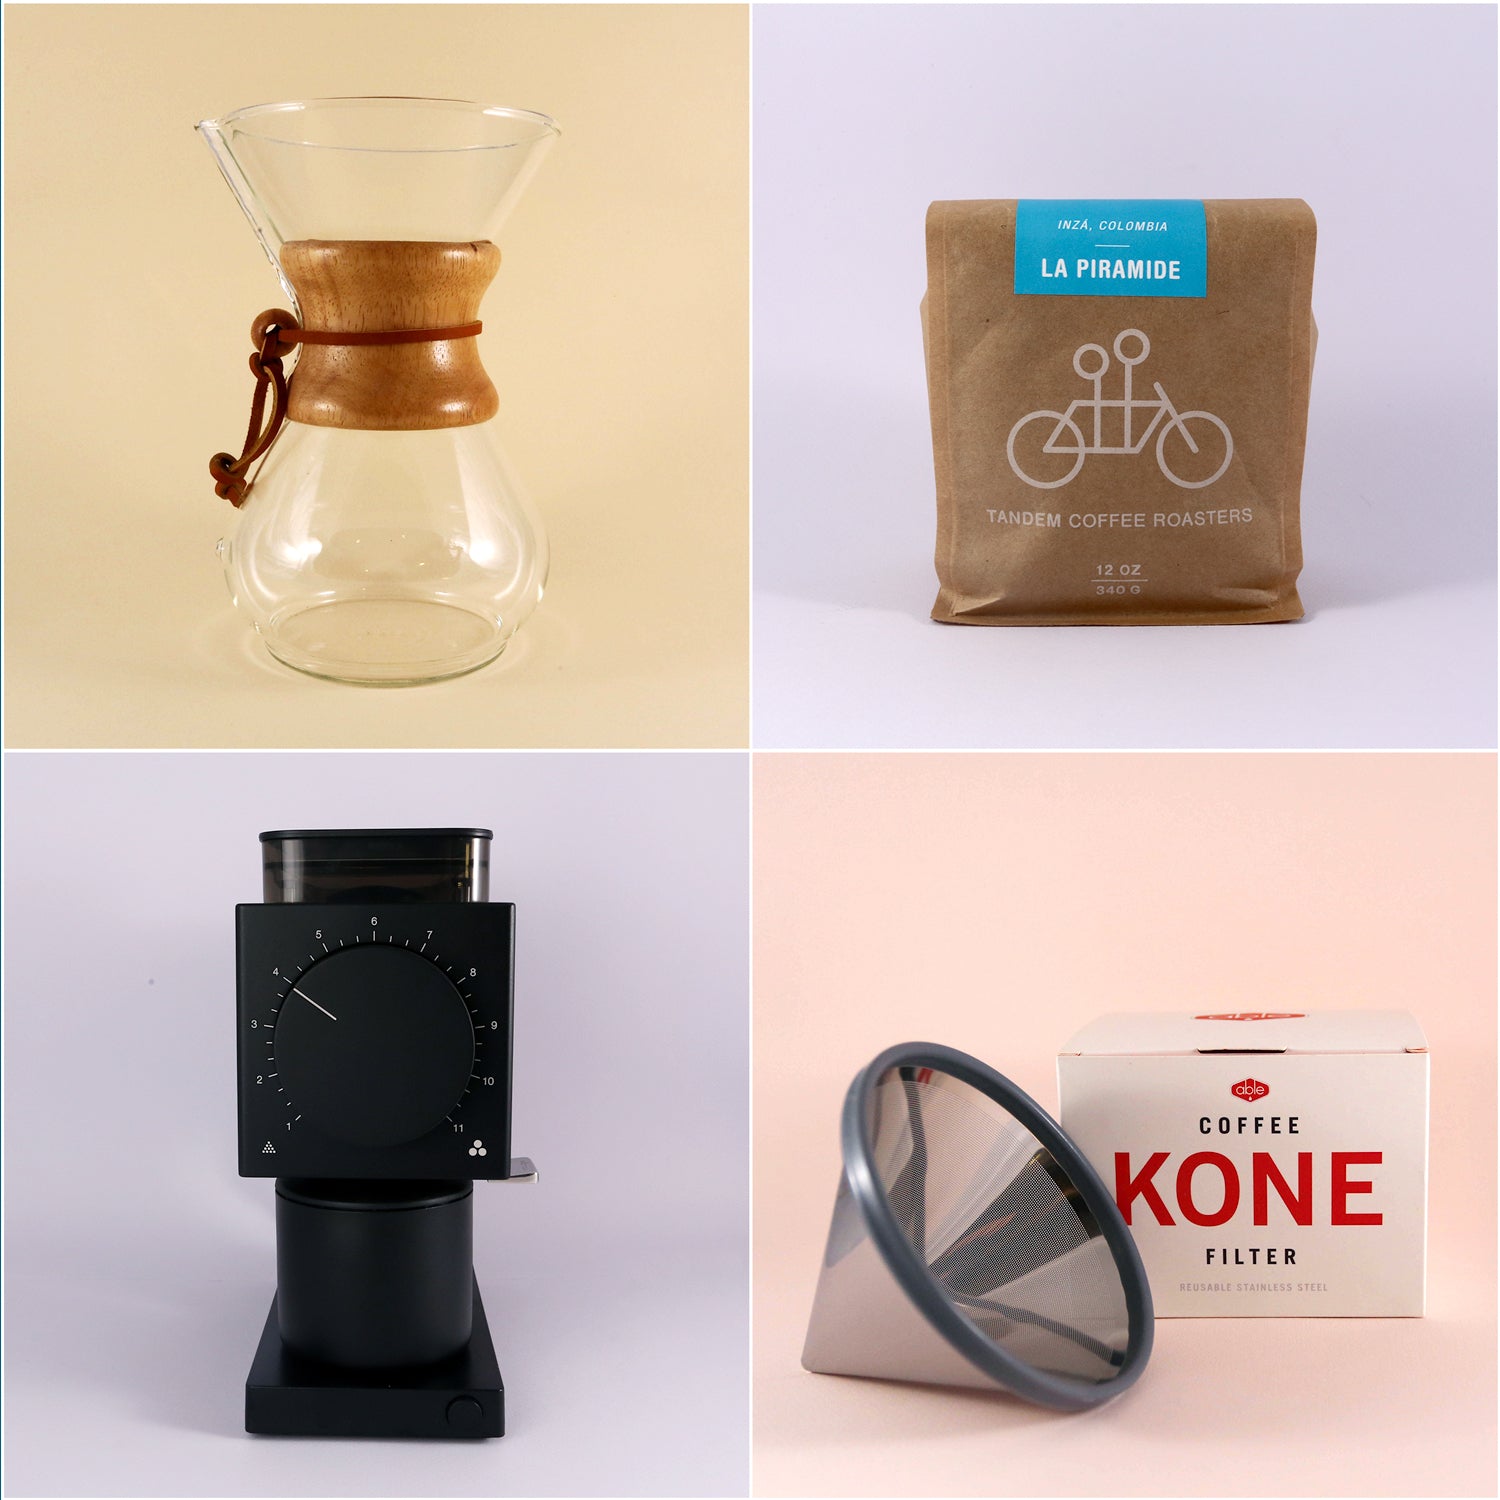 Collage of four images: top left shows the text "Tandem Coffee Roasters Chemex Deluxe Kit", top right features a Chemex Brewer, bottom left displays a bag of "la primera" coffee, and bottom right